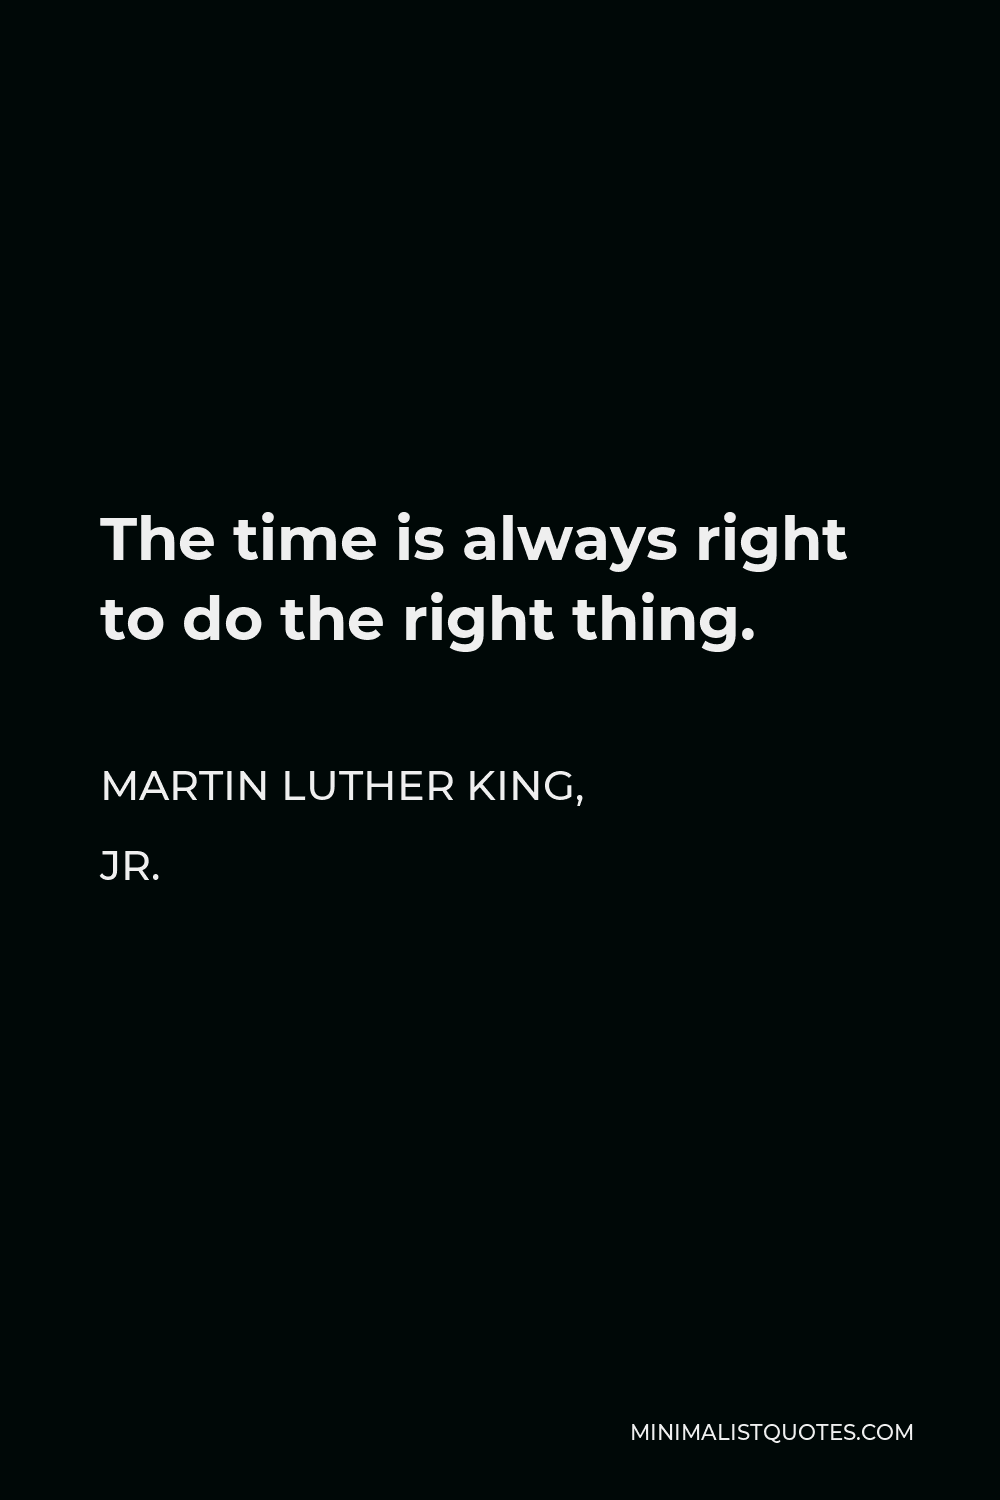 Martin Luther King Jr Quote: The time is always right to do the right thing.